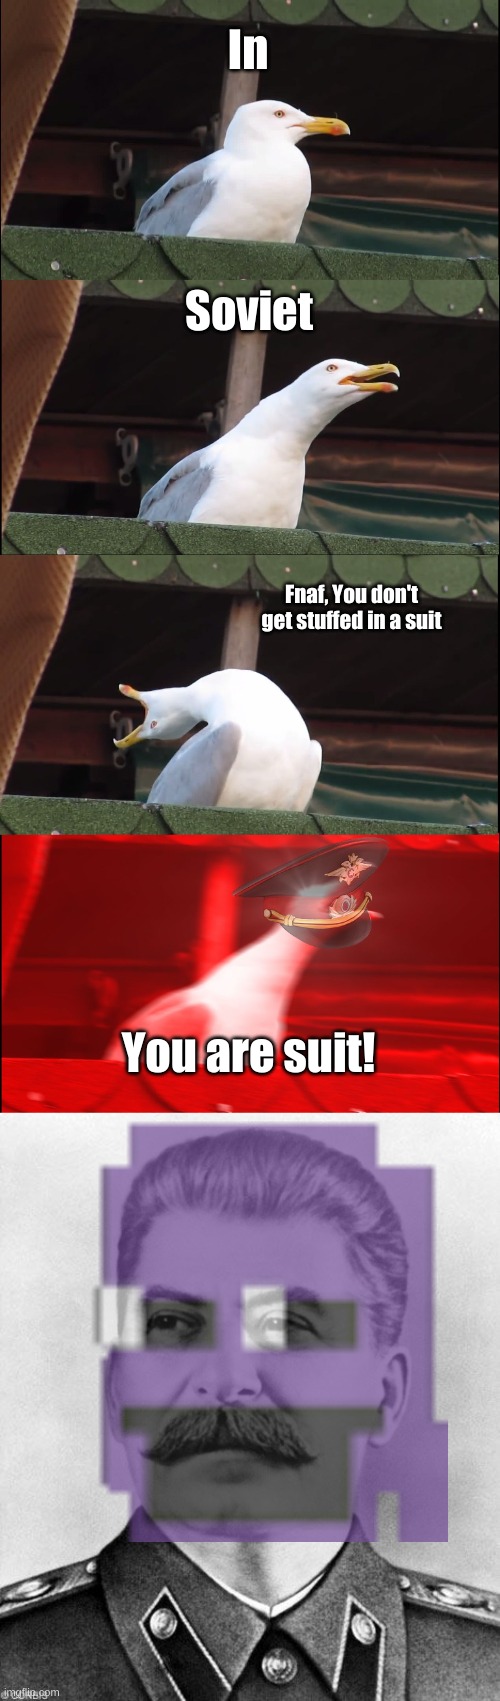 FOR THE MOTHERLAND!! | In; Soviet; Fnaf, You don't get stuffed in a suit; You are suit! | image tagged in memes,inhaling seagull,hypocrite stalin | made w/ Imgflip meme maker